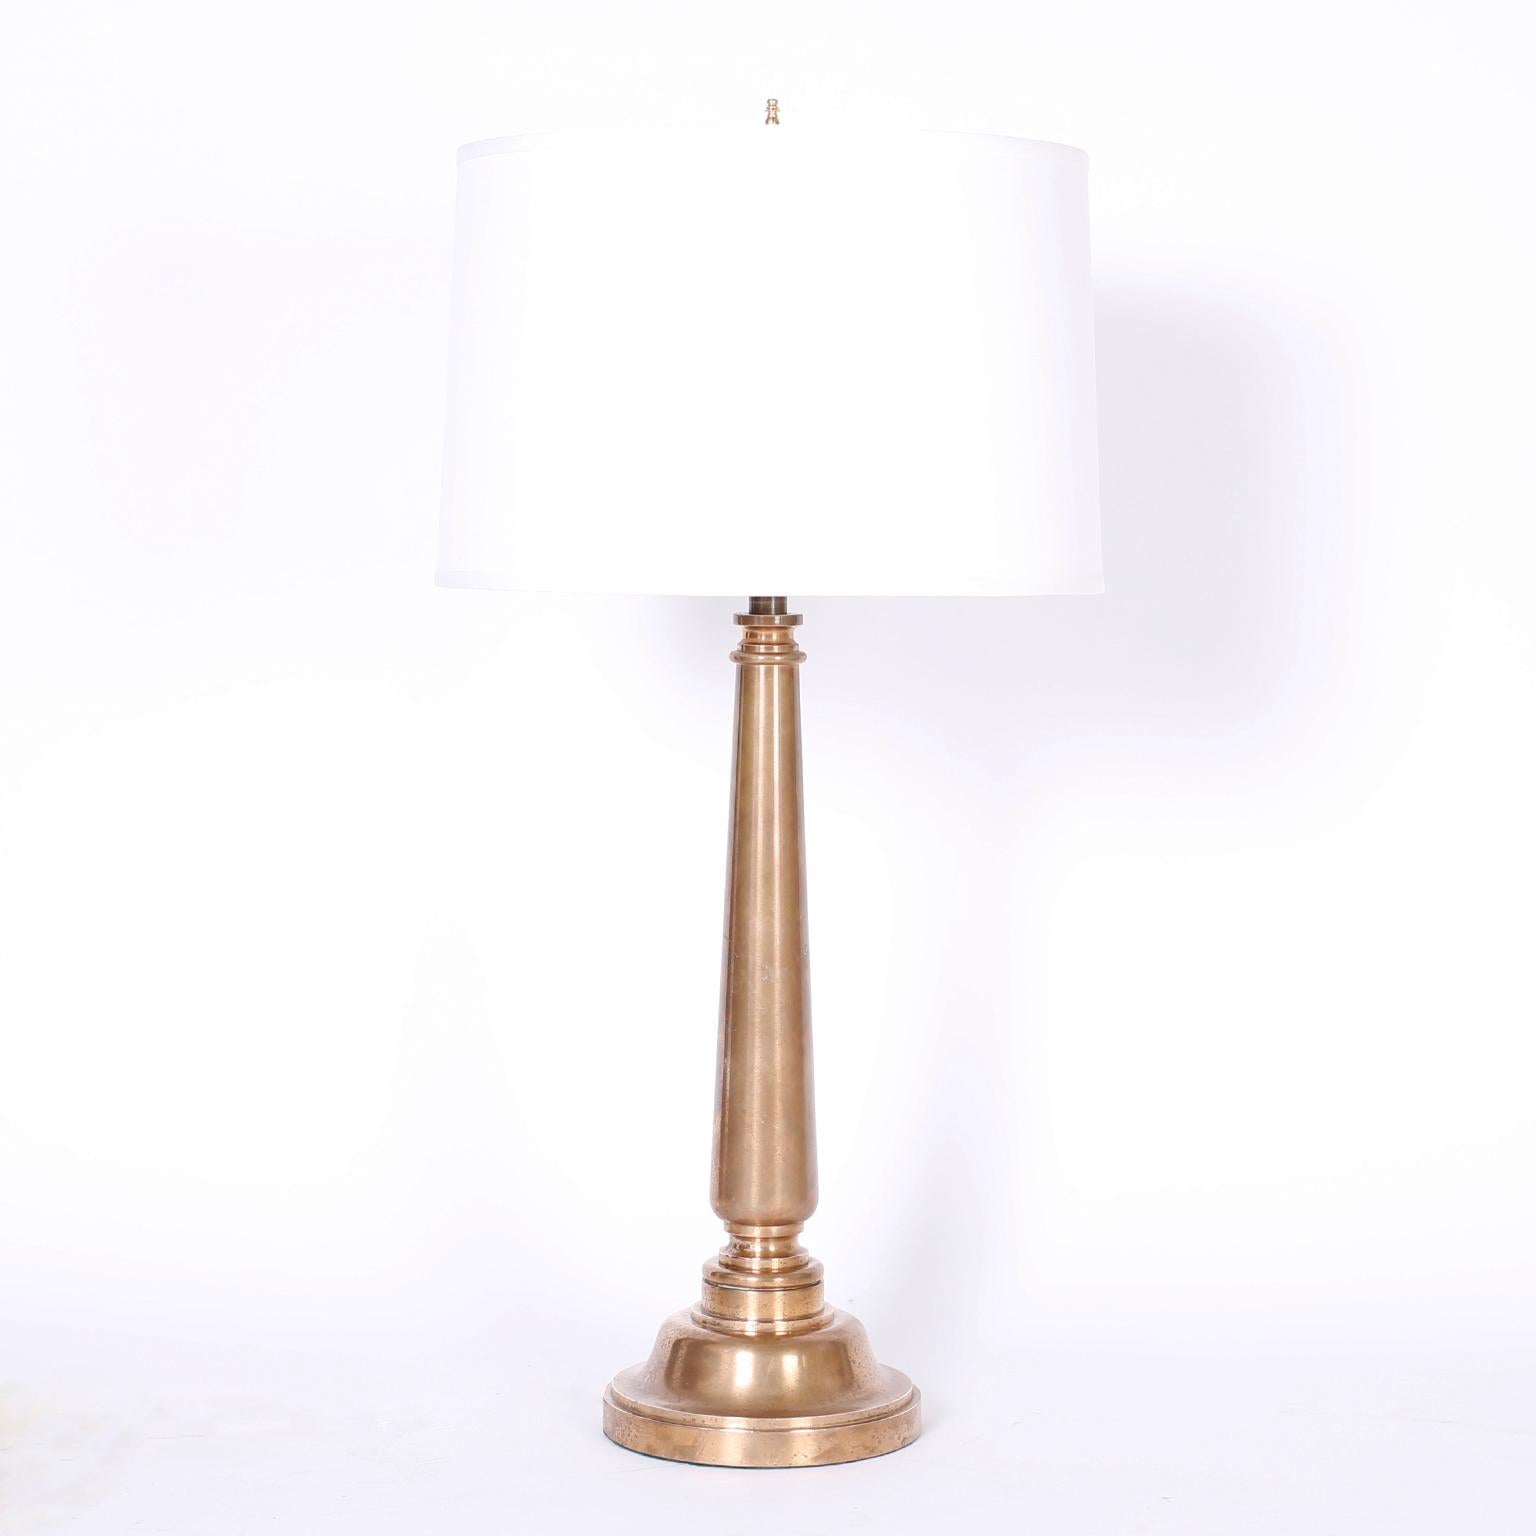 Pair of midcentury table lamps crafted in bronze with a modern, yet classical form and a lush polished patina.